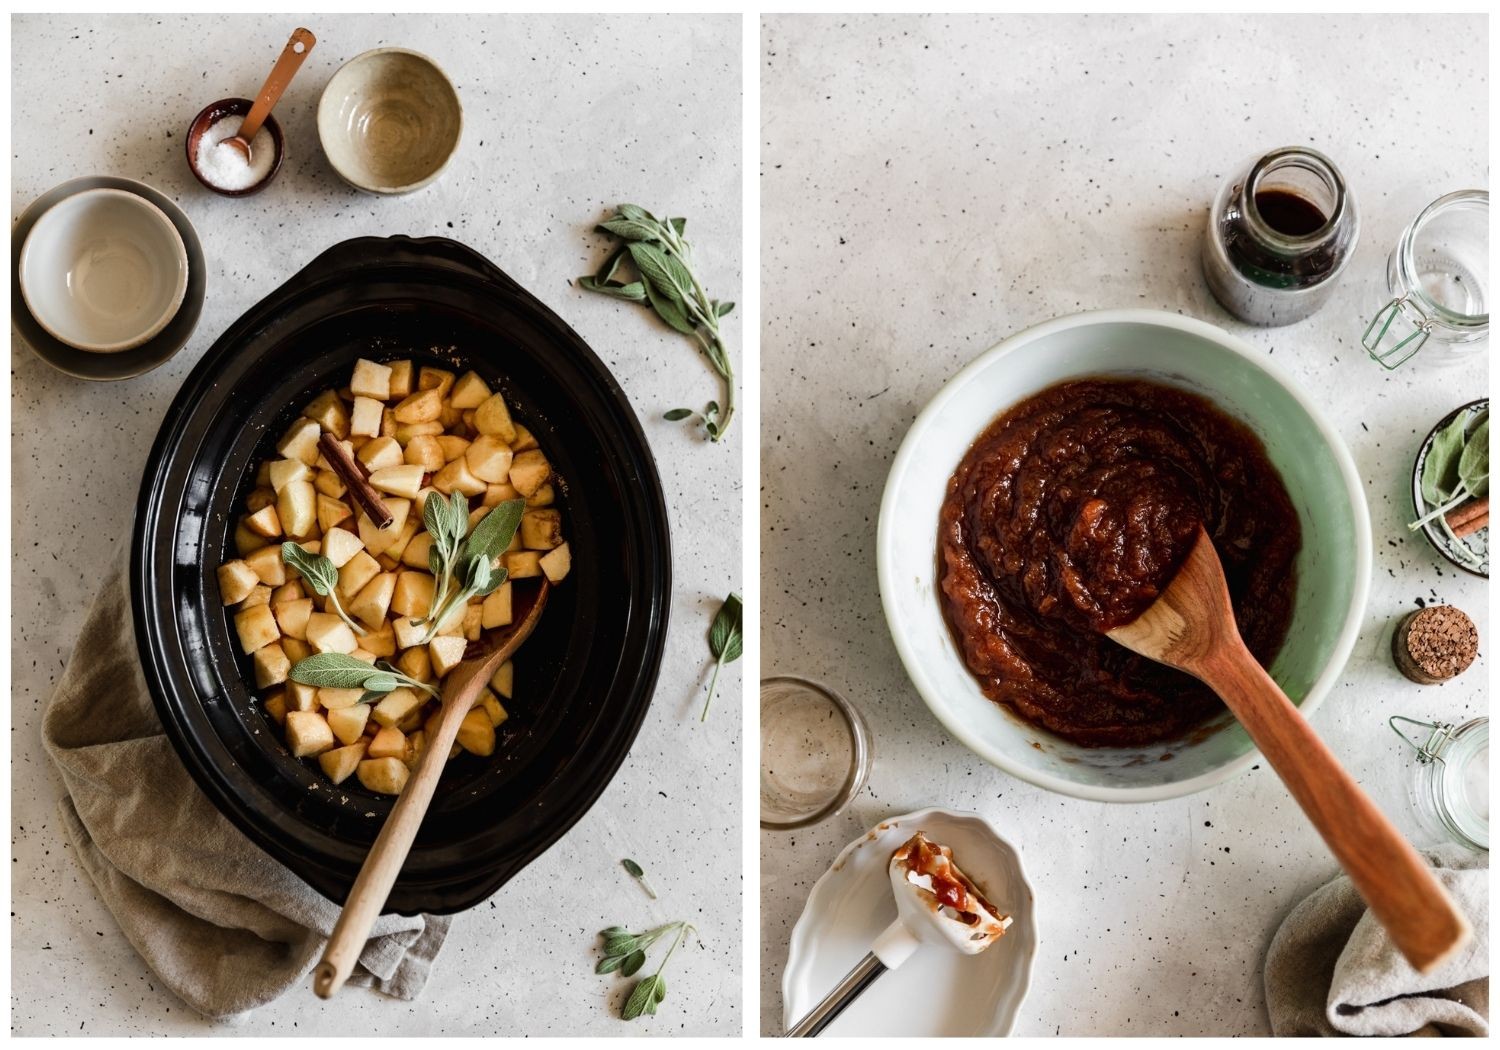 Two overhead images; on the left, a black slow cooker with diced apples and sage on a grey counter next to empty white bowls. On the right, a white bowl of jam with a wood spoon sticking out of it next to a beige linen, jars, and a bottle of vanilla extract.